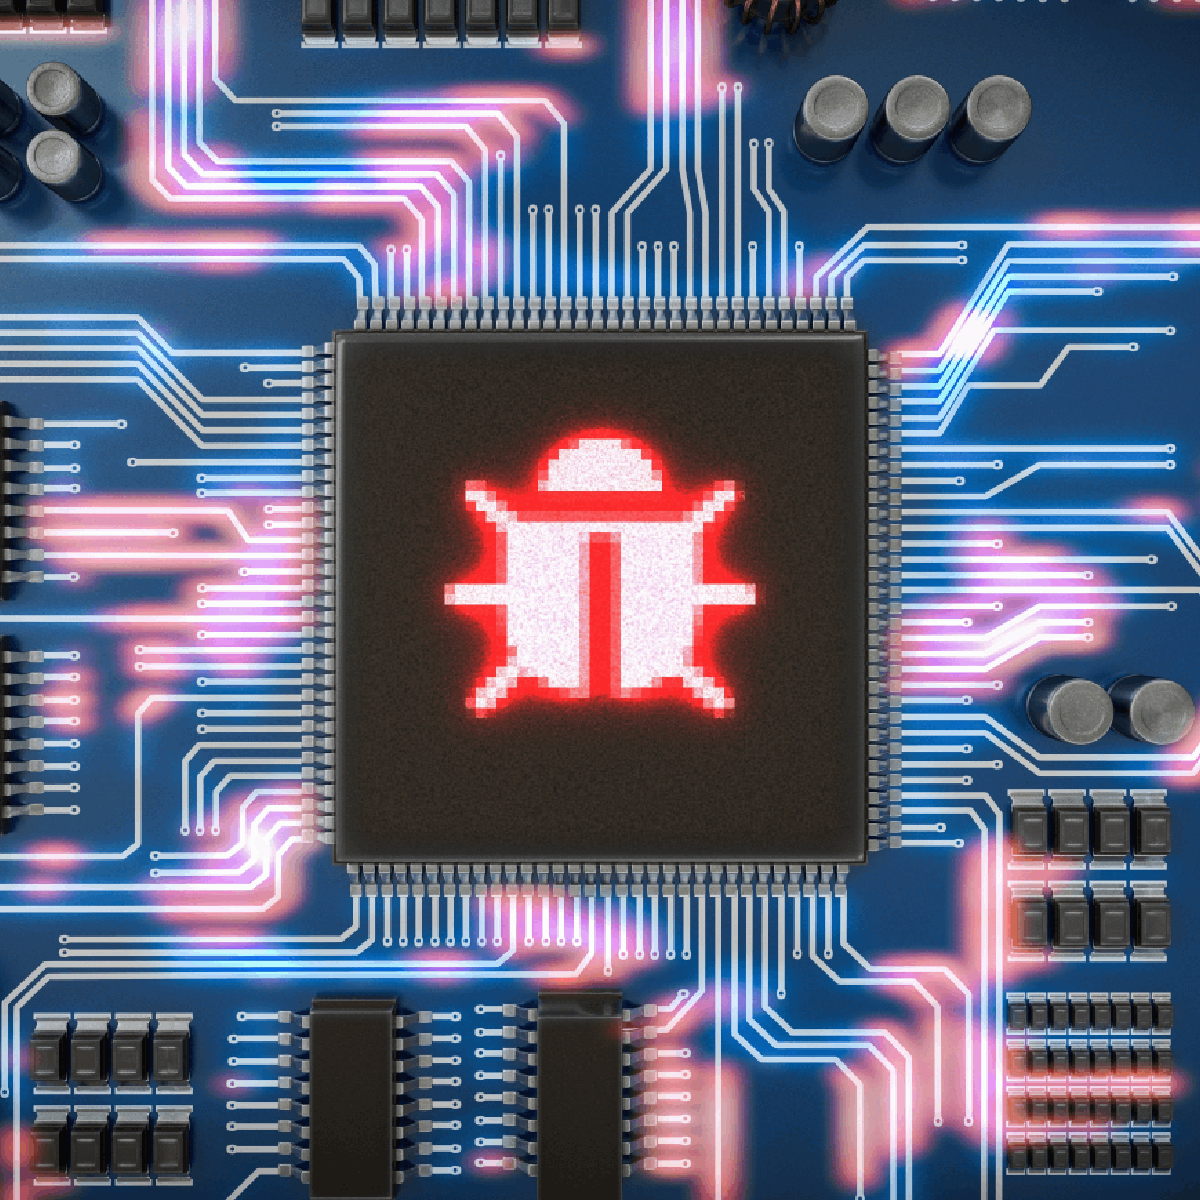 An illustration of a circuit board and microchip with a bug symbol representing a computer virus on it